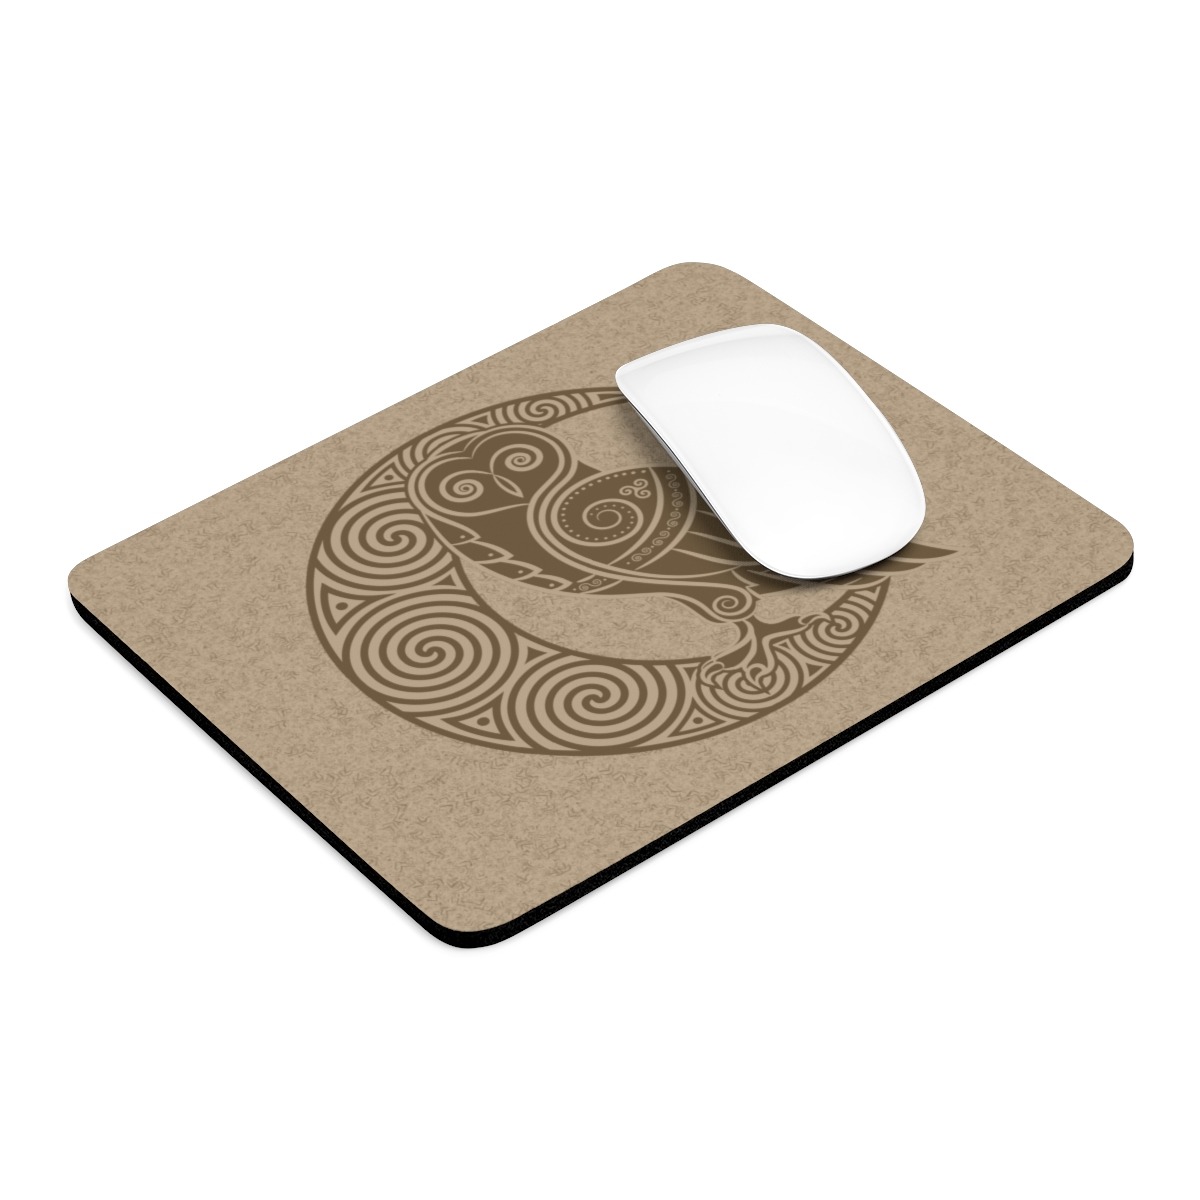 Gold Owl Crescent Moon Mouse Pad